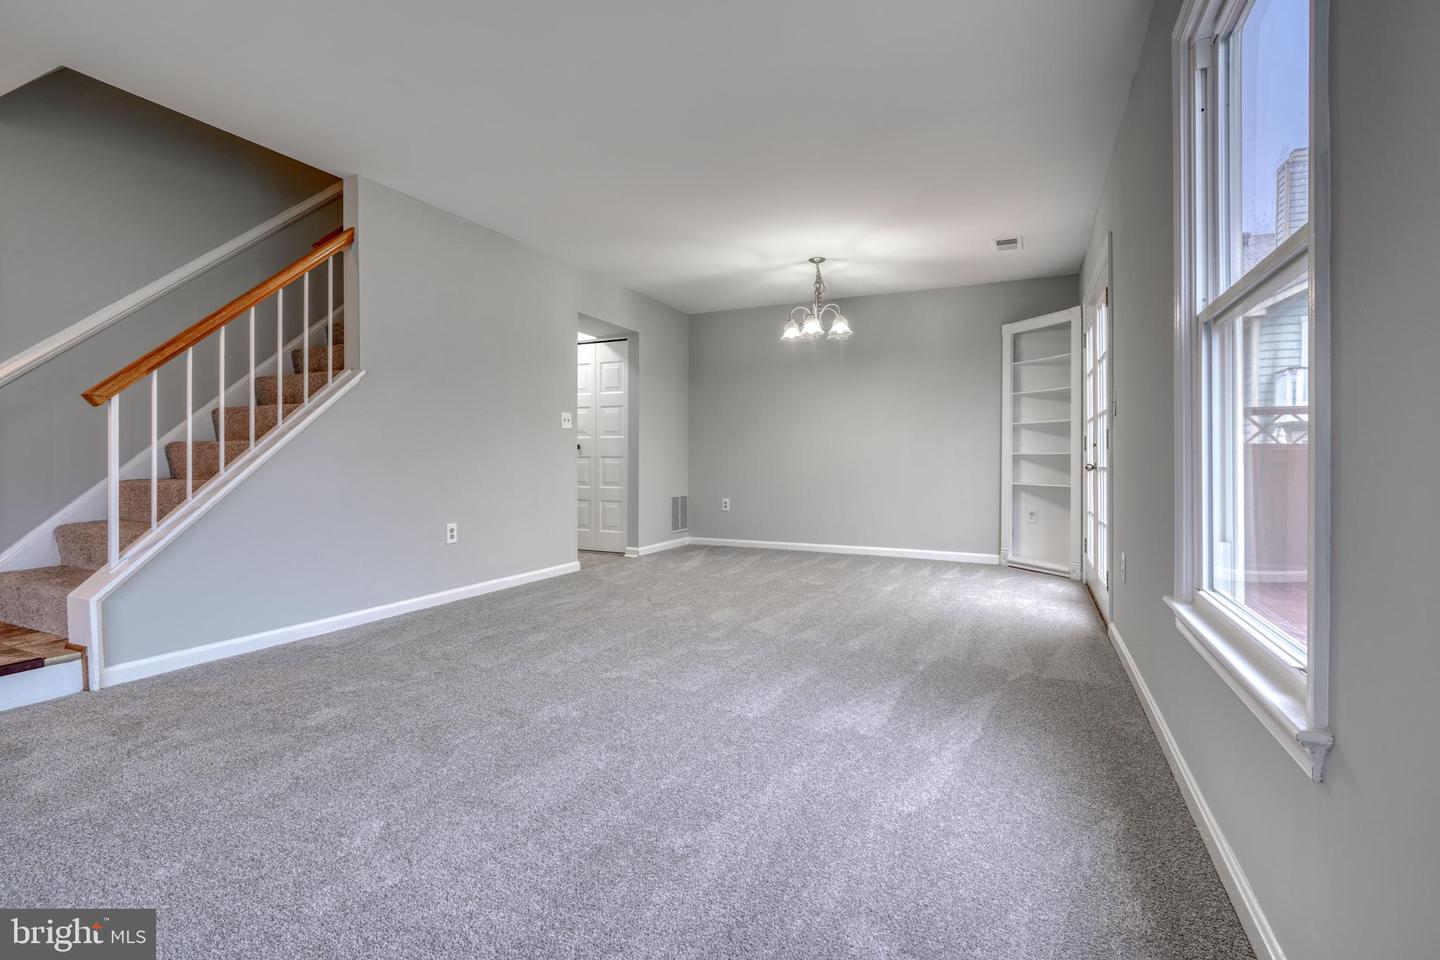 Photo 6 of 42 of 9441 Trevino Ter #84 townhome